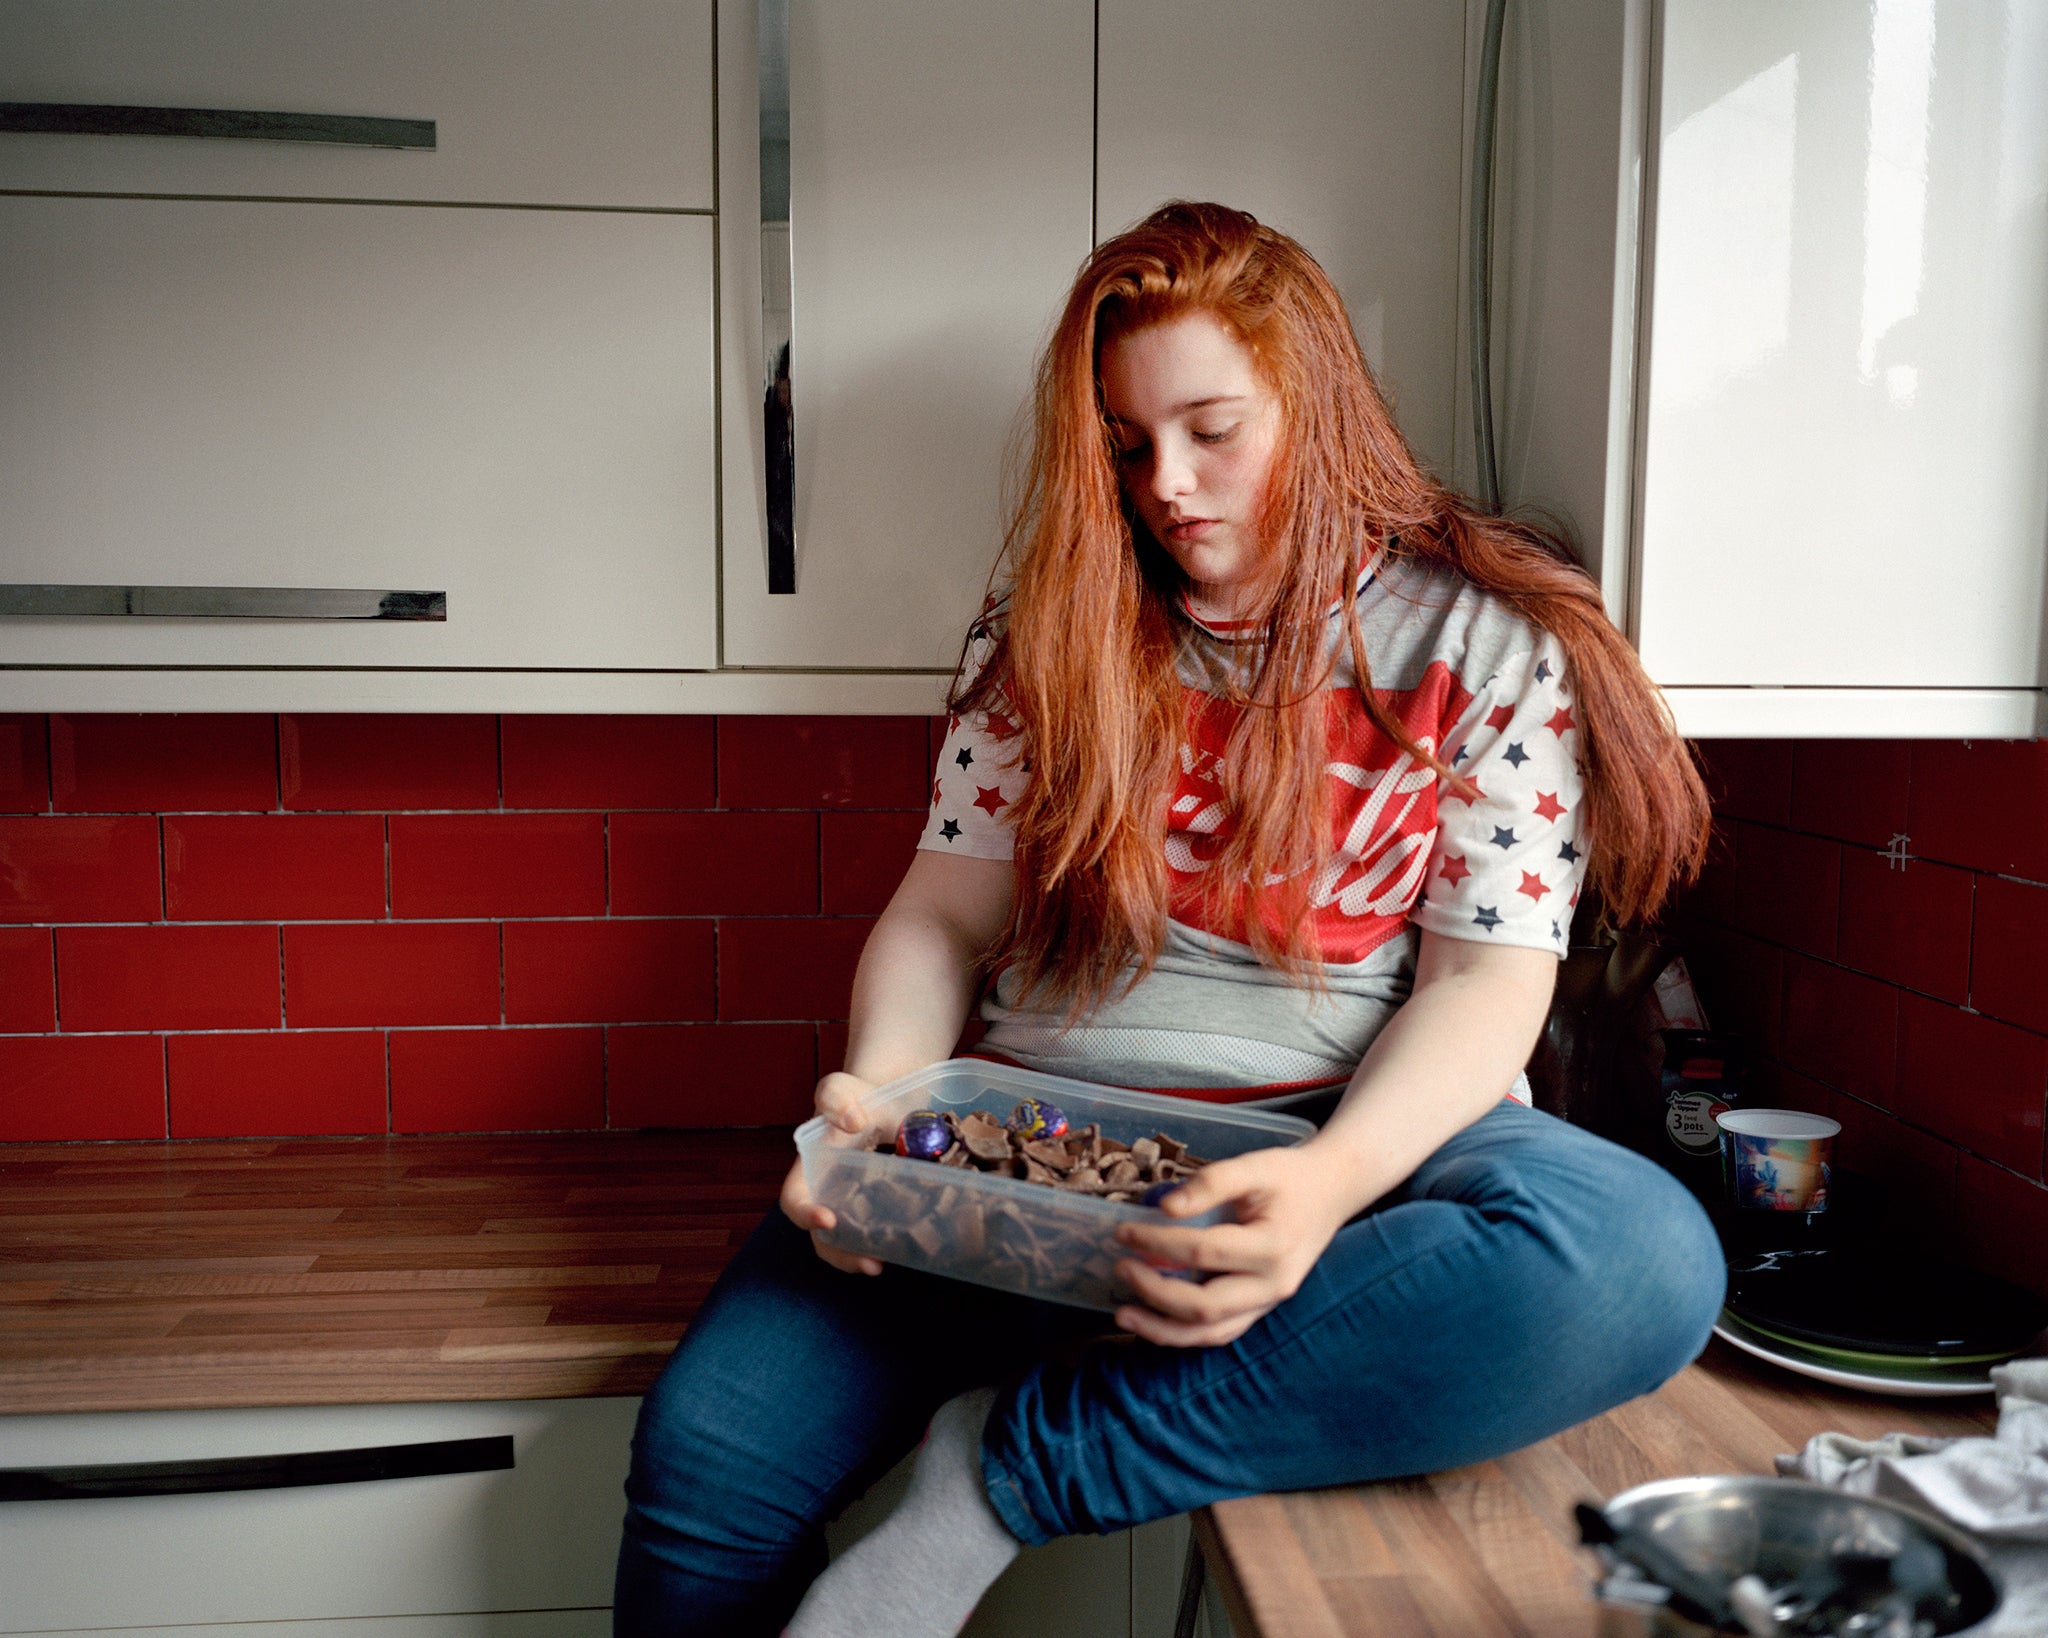 Deena, age 12, looks at her Easter Chocolate at her home in Port Talbot, Wales. From the series, The Big O: an intimate study of the young people behind the childhood obesity statistics